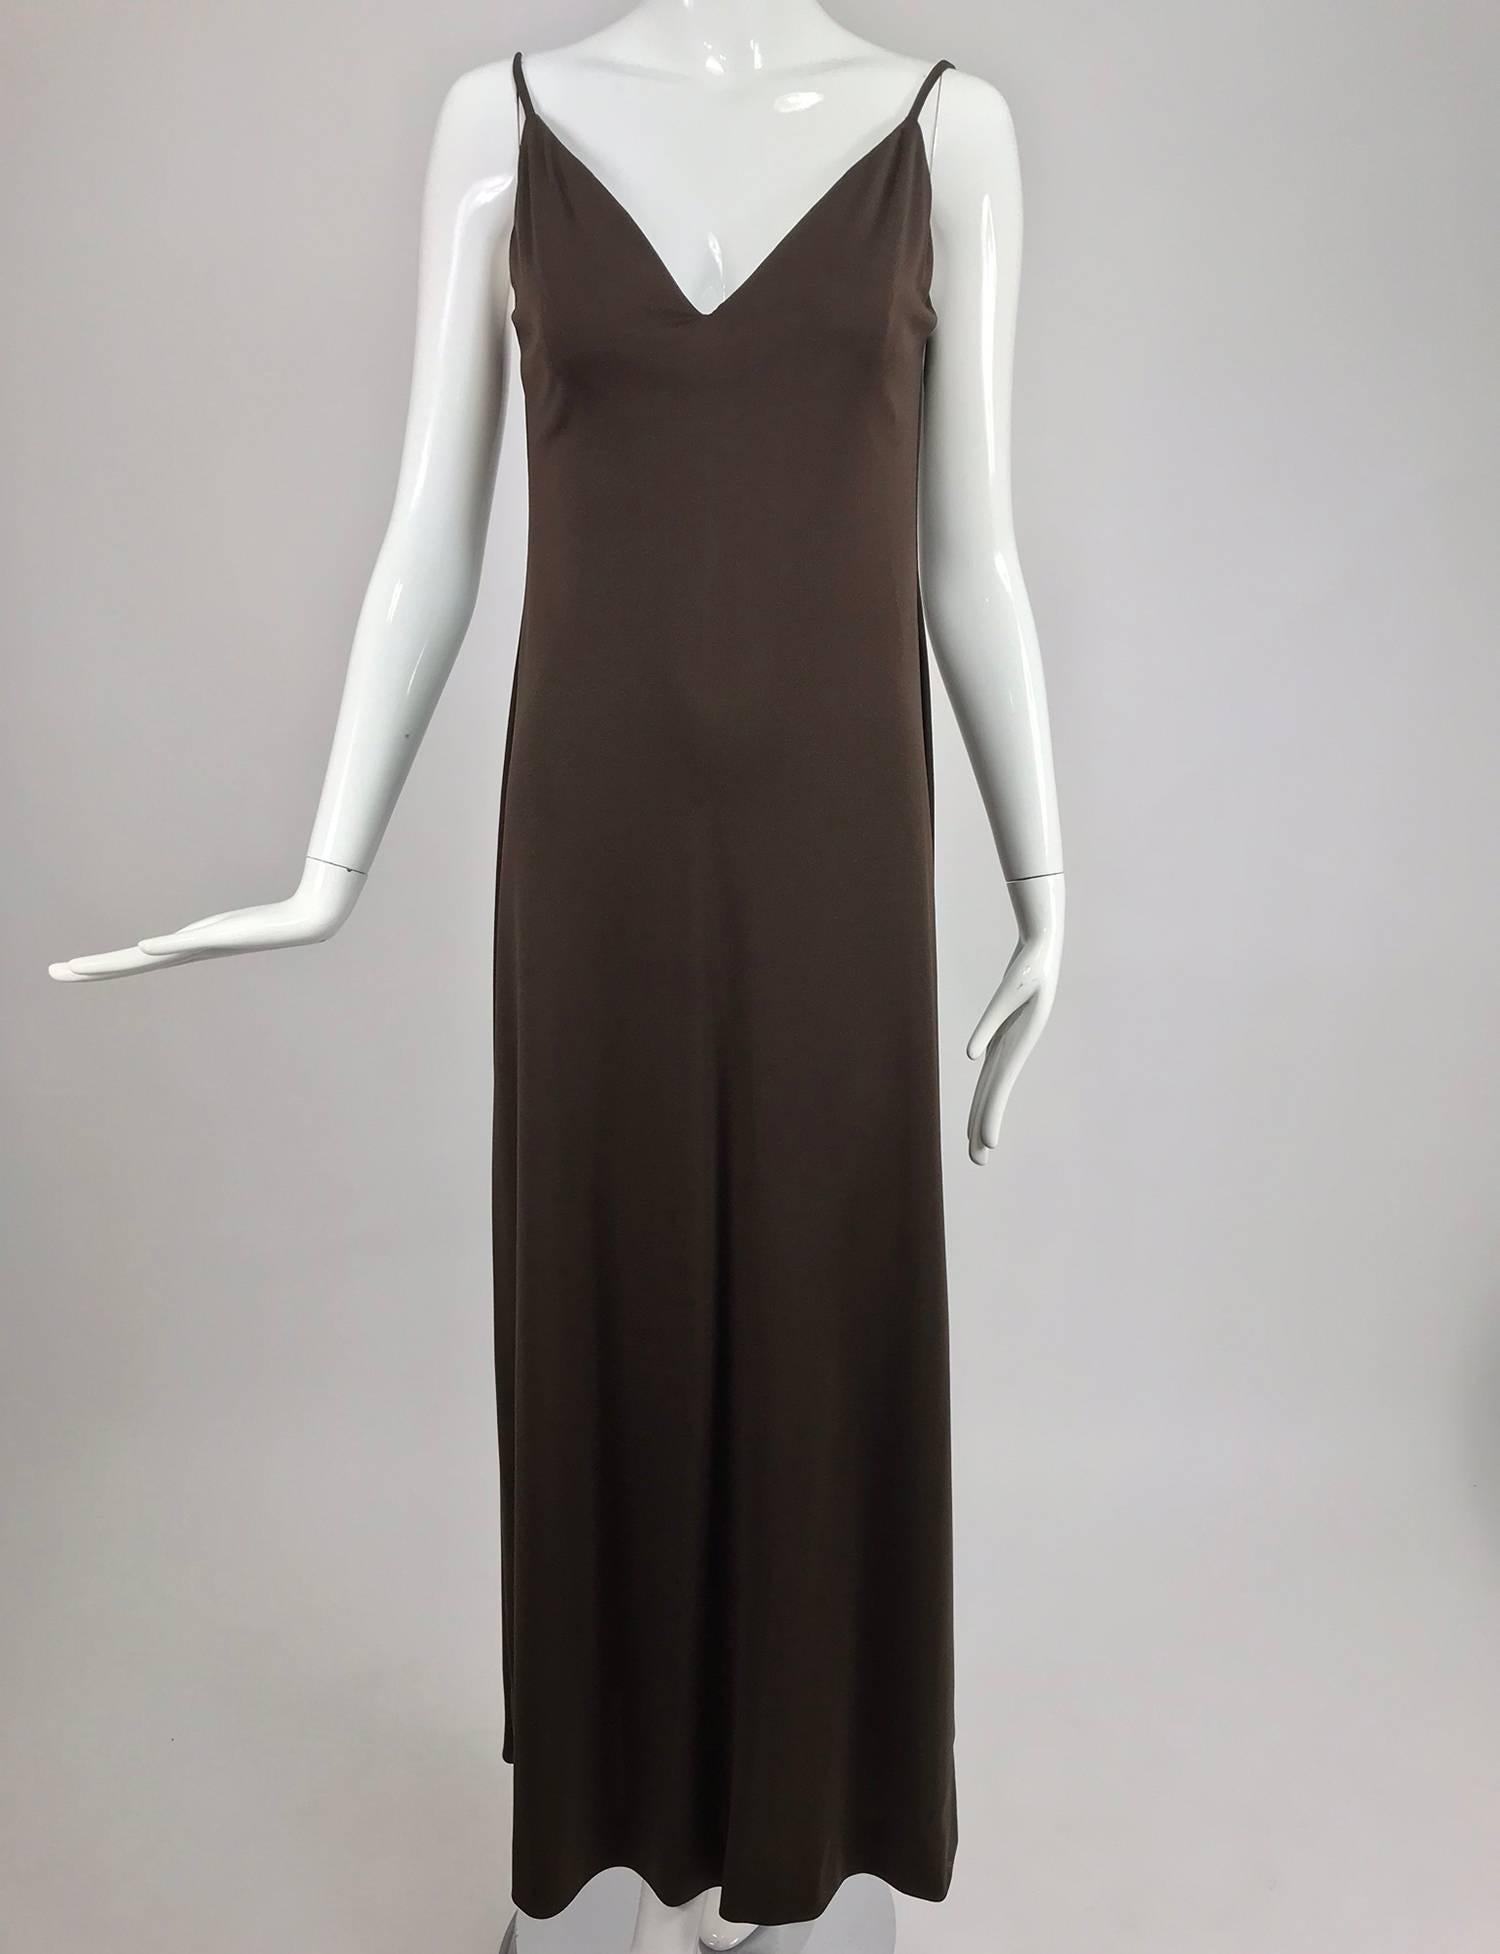 Estevez chocolate brown jersey maxi dress and jacket from the 1970s. Body hugging A line maxi dress with matching cropped, long sleeve jacket with a single button front closure. The slip style dress has a V neckline and low back, narrow shoulder